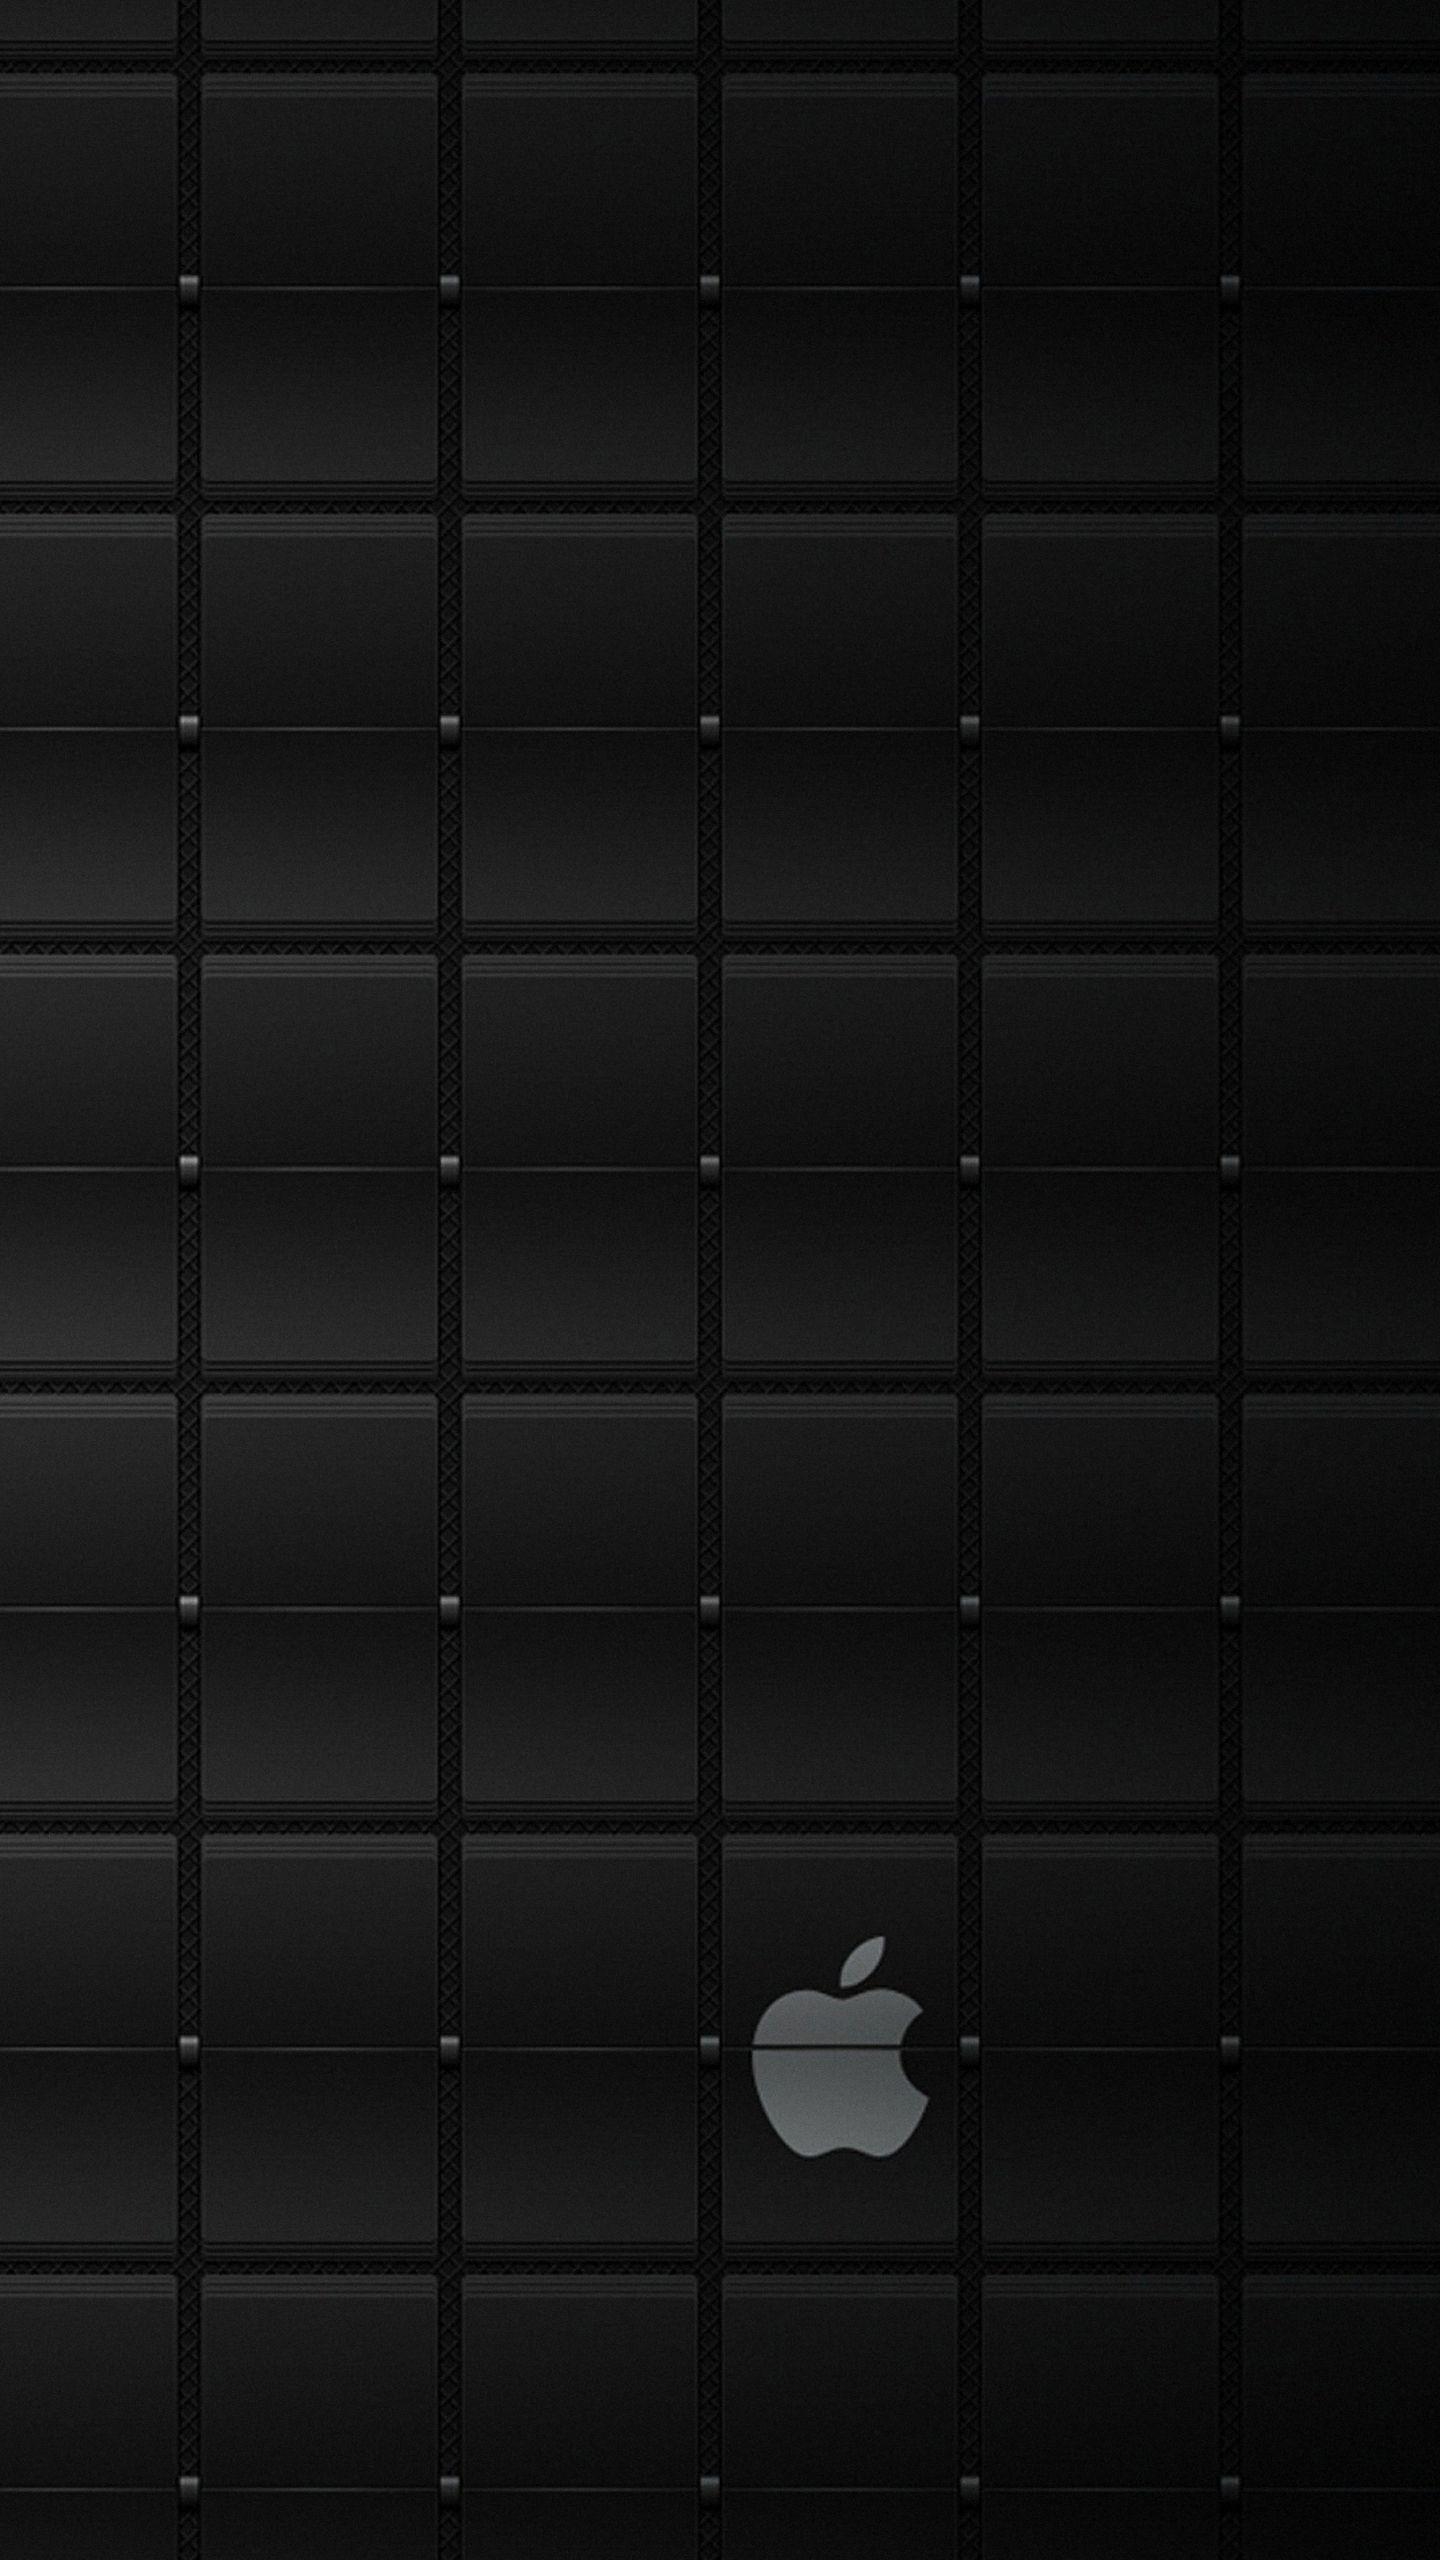 Black Iphone 6 Wallpapers Top Free Black Iphone 6 Backgrounds